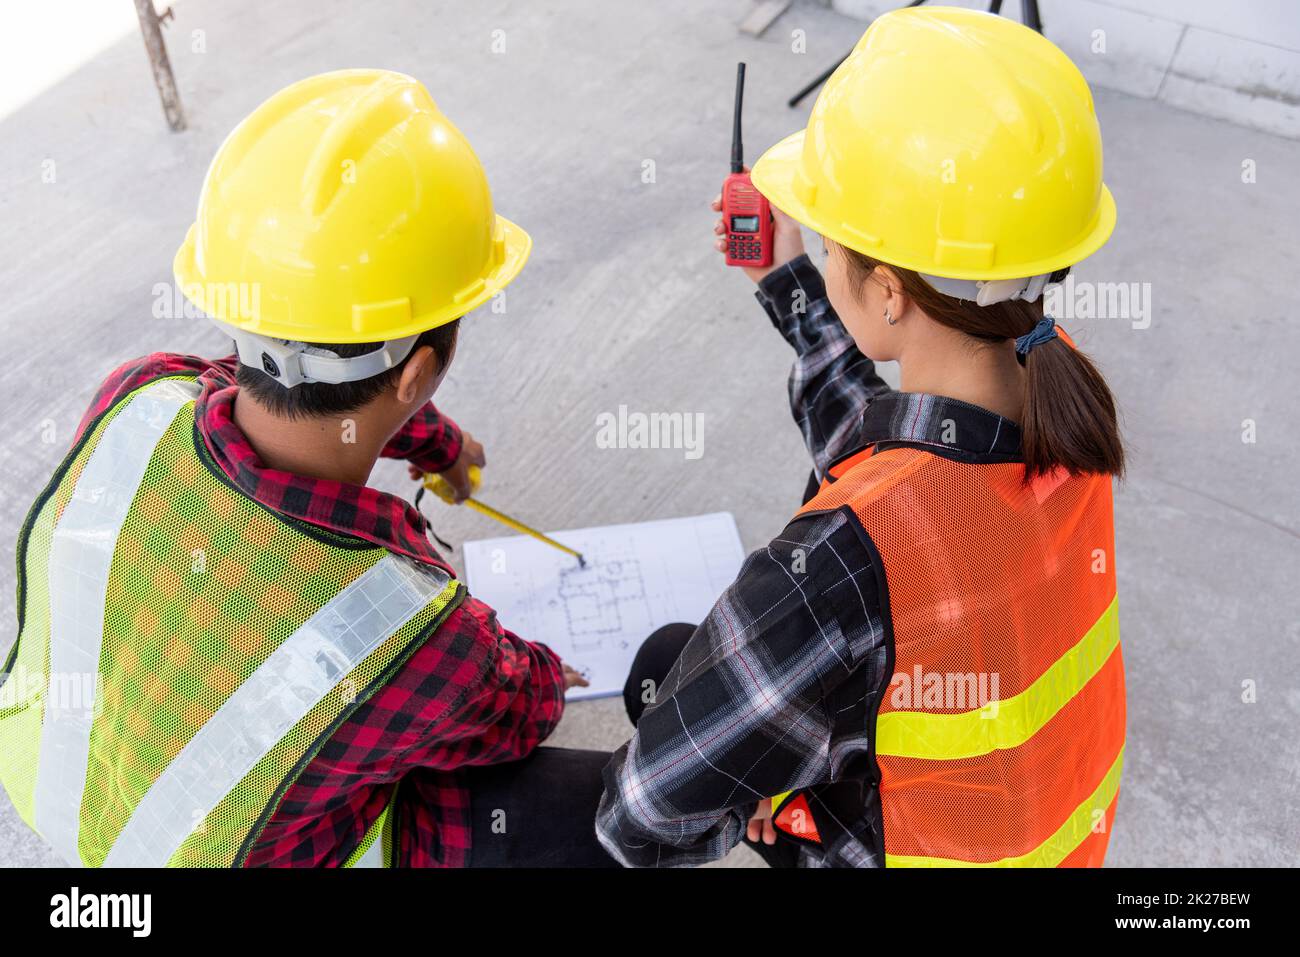 Architect and client discuss help create plan with blueprint of the building at construction site floor Stock Photo